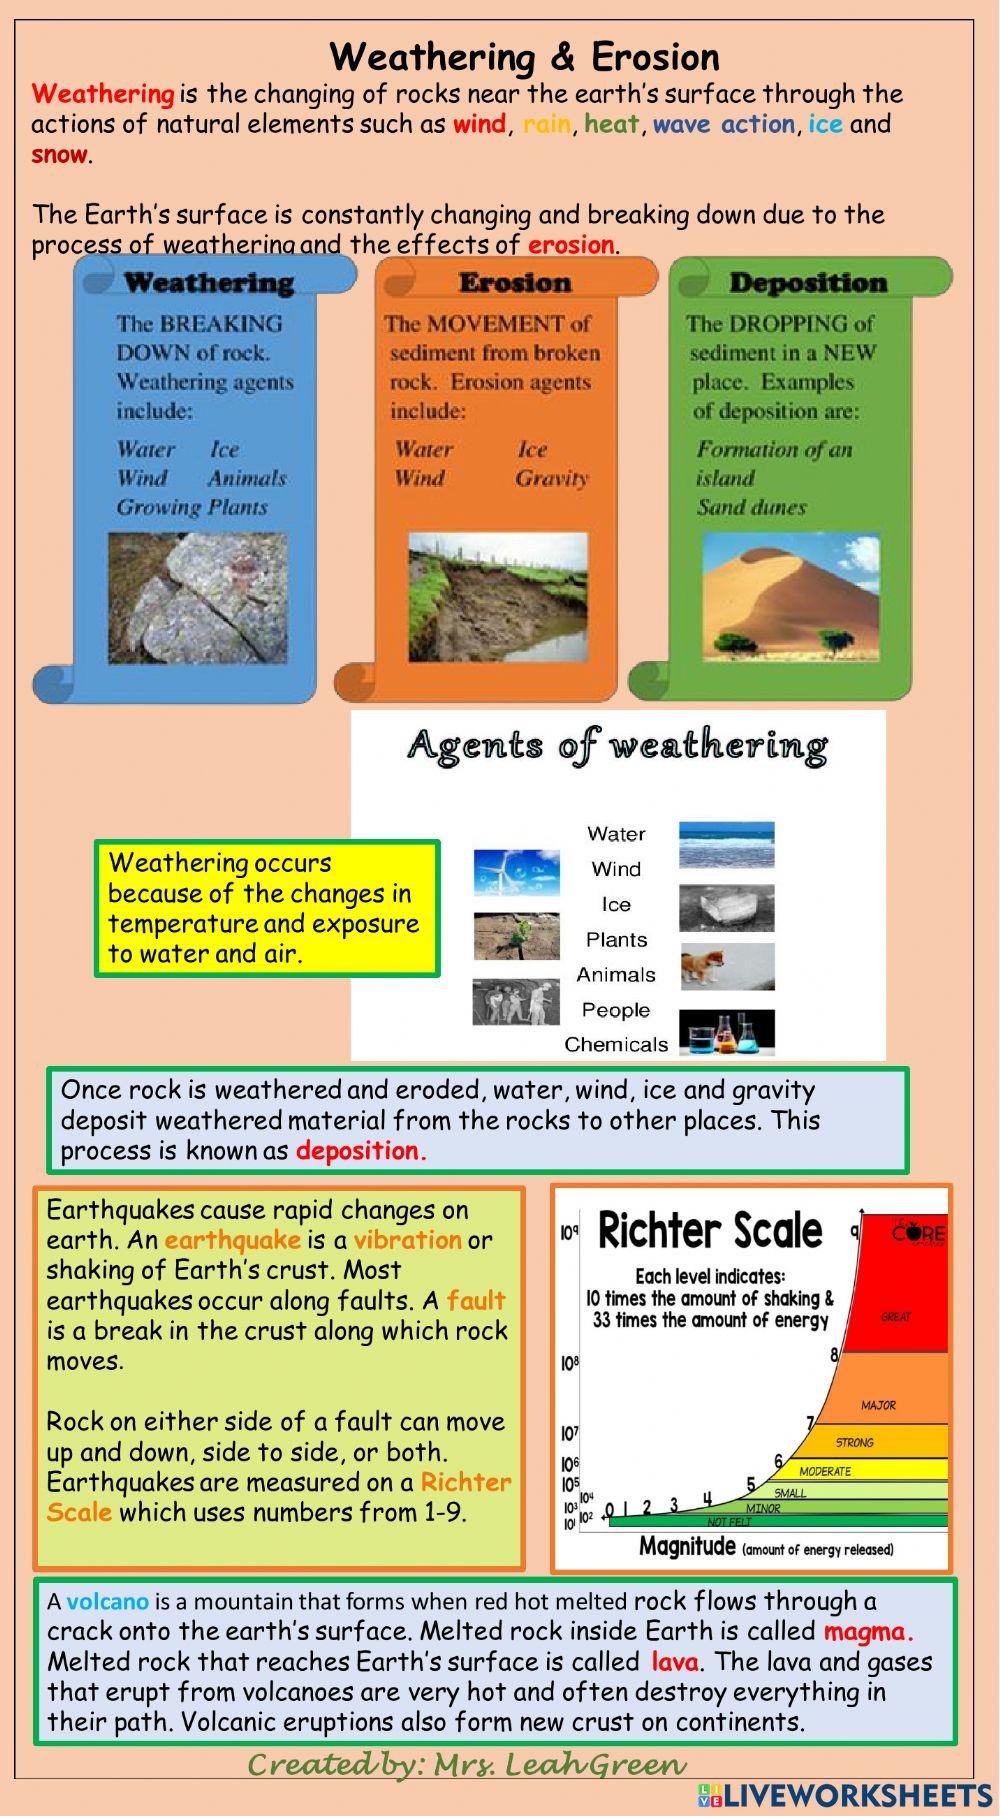 Weathering and Erosion Content notes